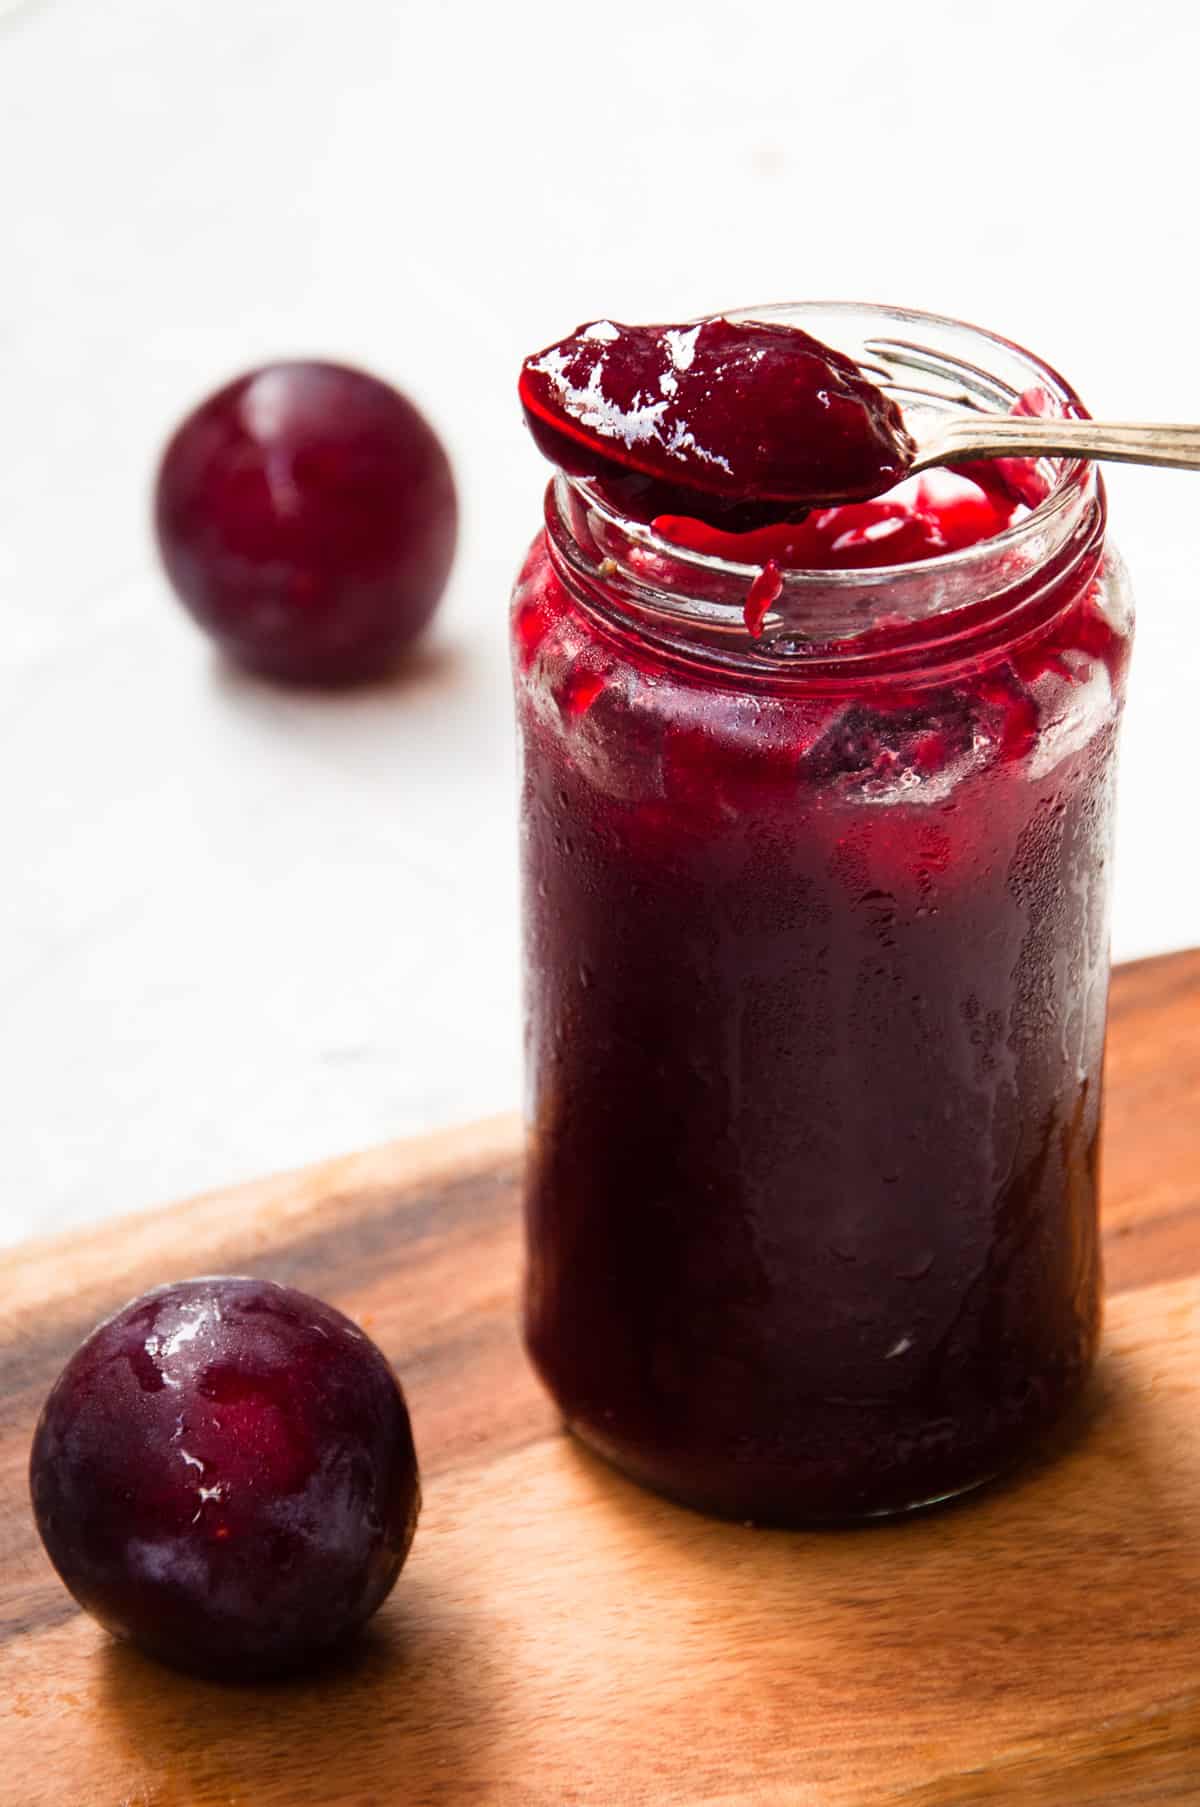 A jar of plum jam with a spoon full of jam placed on the rim.